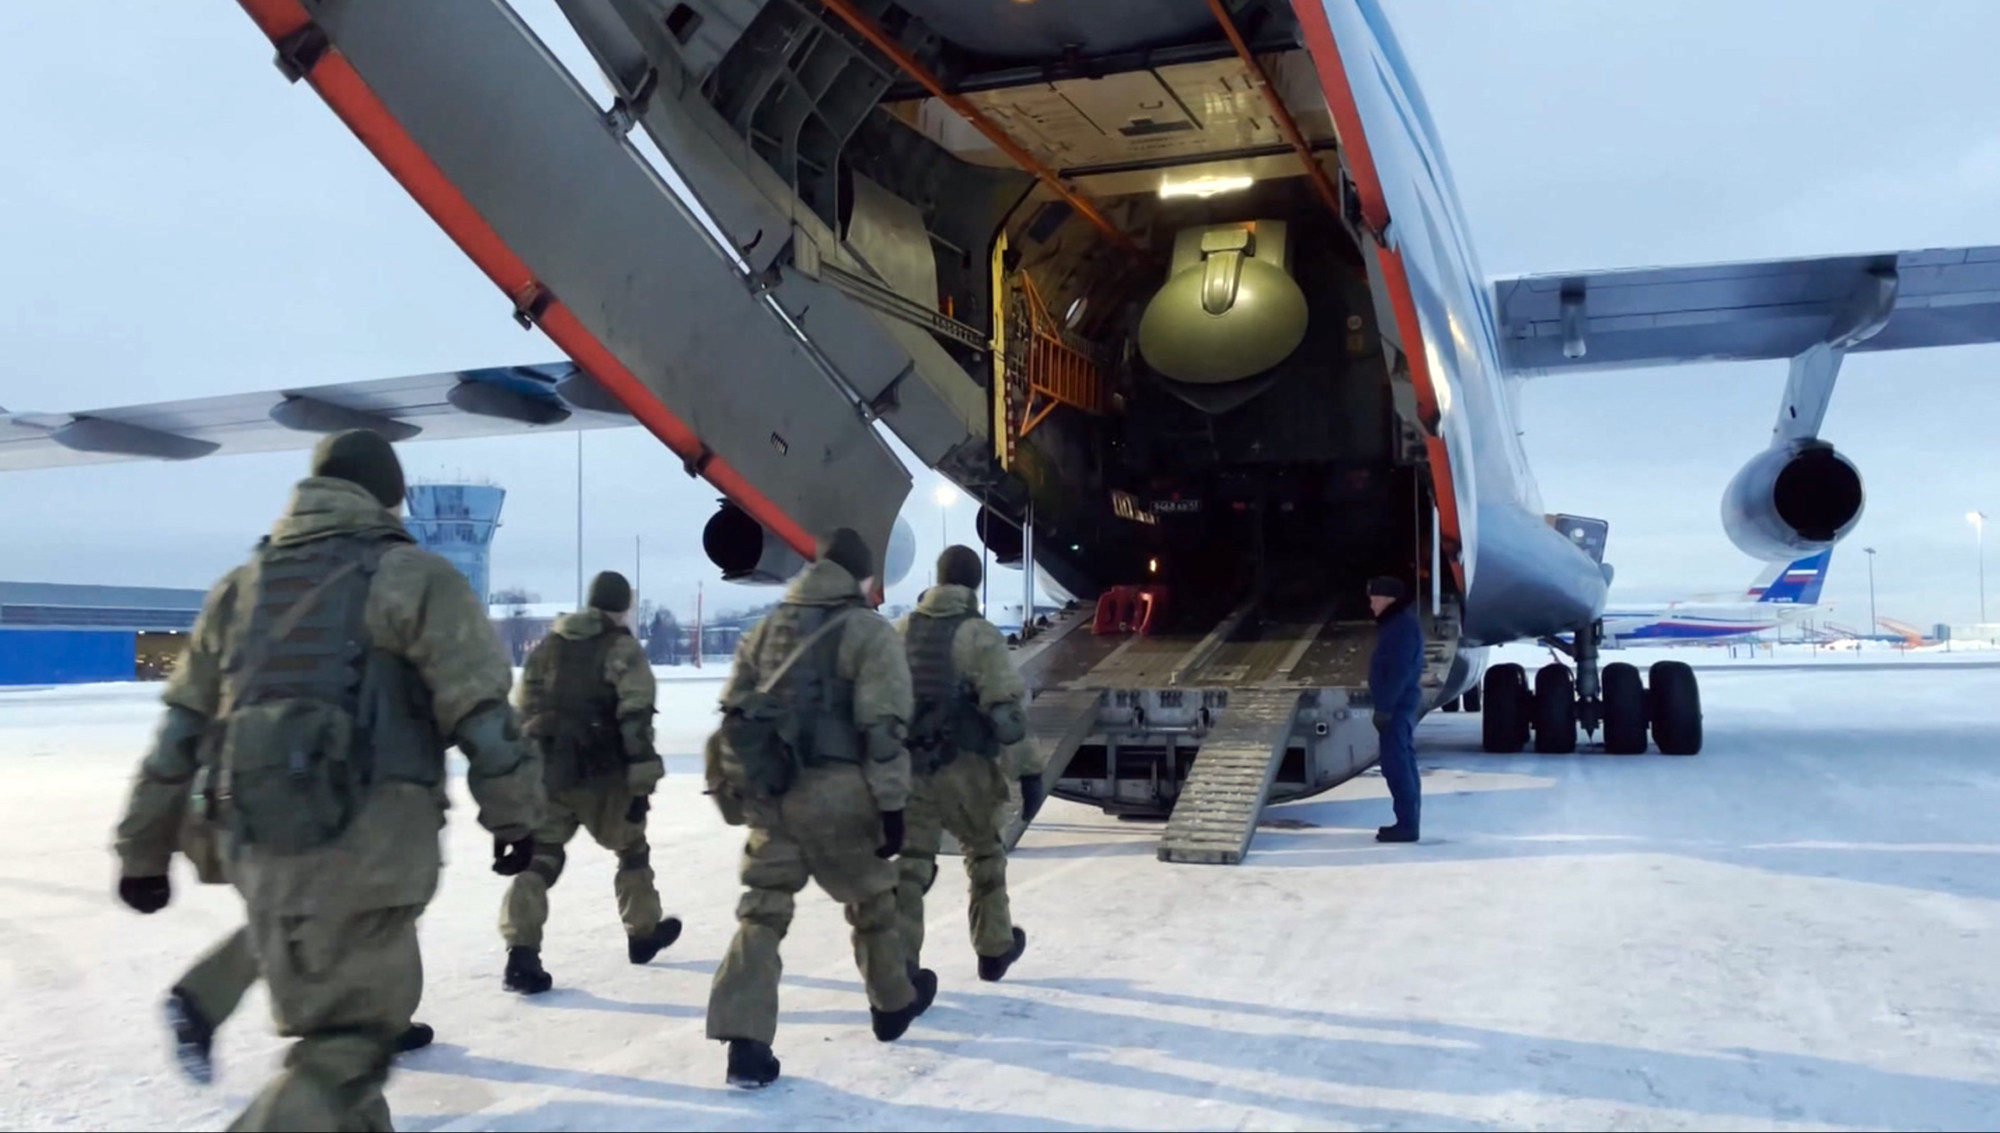 Russian peacekeepers board a Russian military plane at an airfield outside Moscow to fly to Kazakhstan in January 2022. Photo: Russian Defence Ministry Press Service via AP